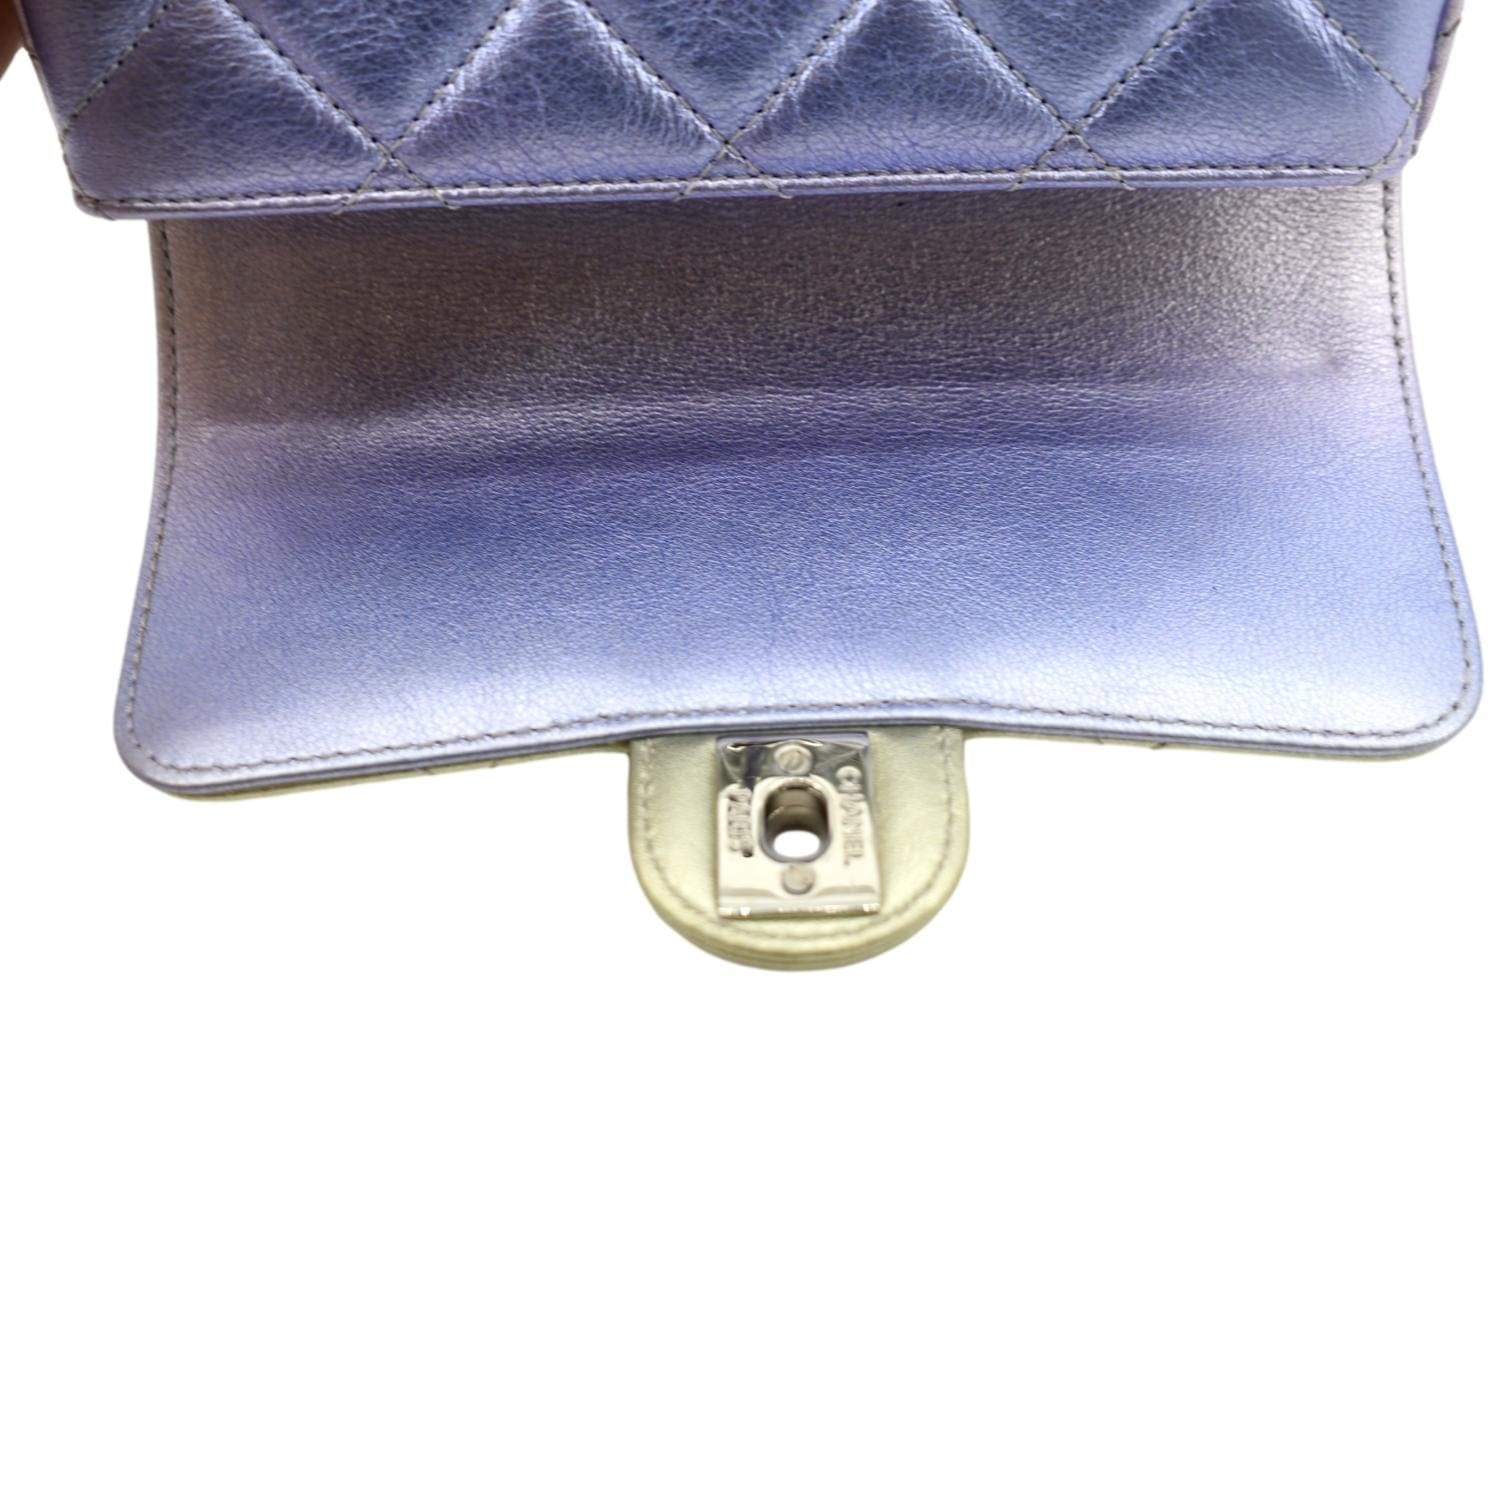 Chanel Silver Quilted Metallic Calfskin Leather Mini Top Handle